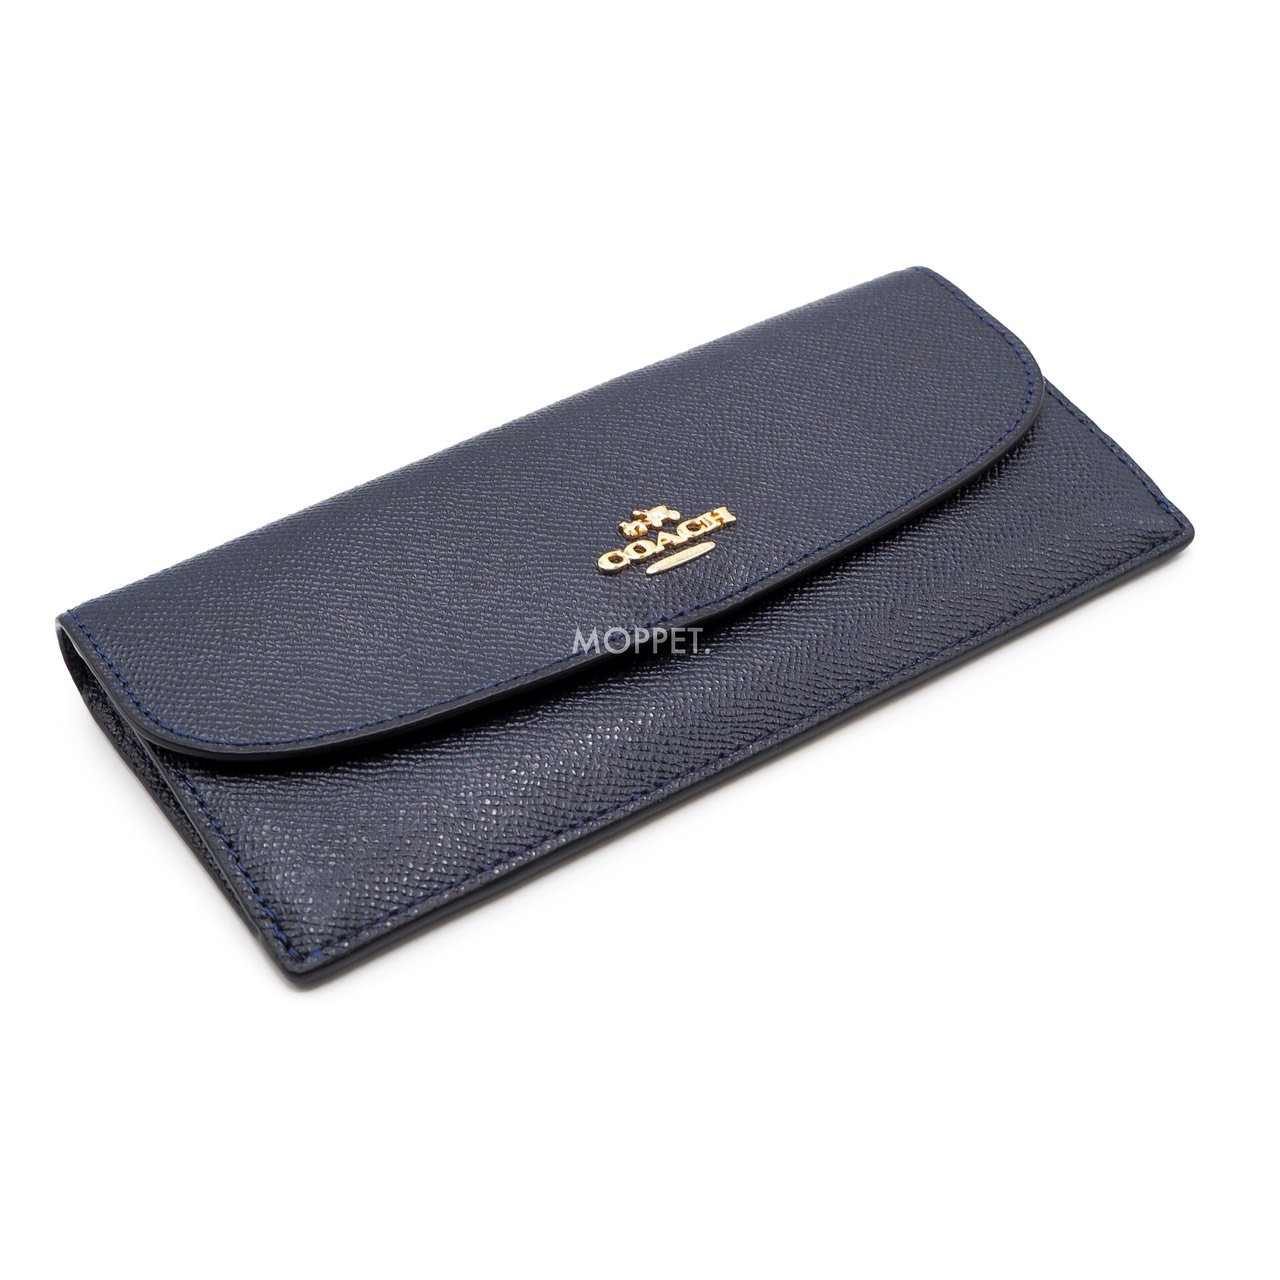 New Coach Soft Long Wallet in Midnight Leather GHW